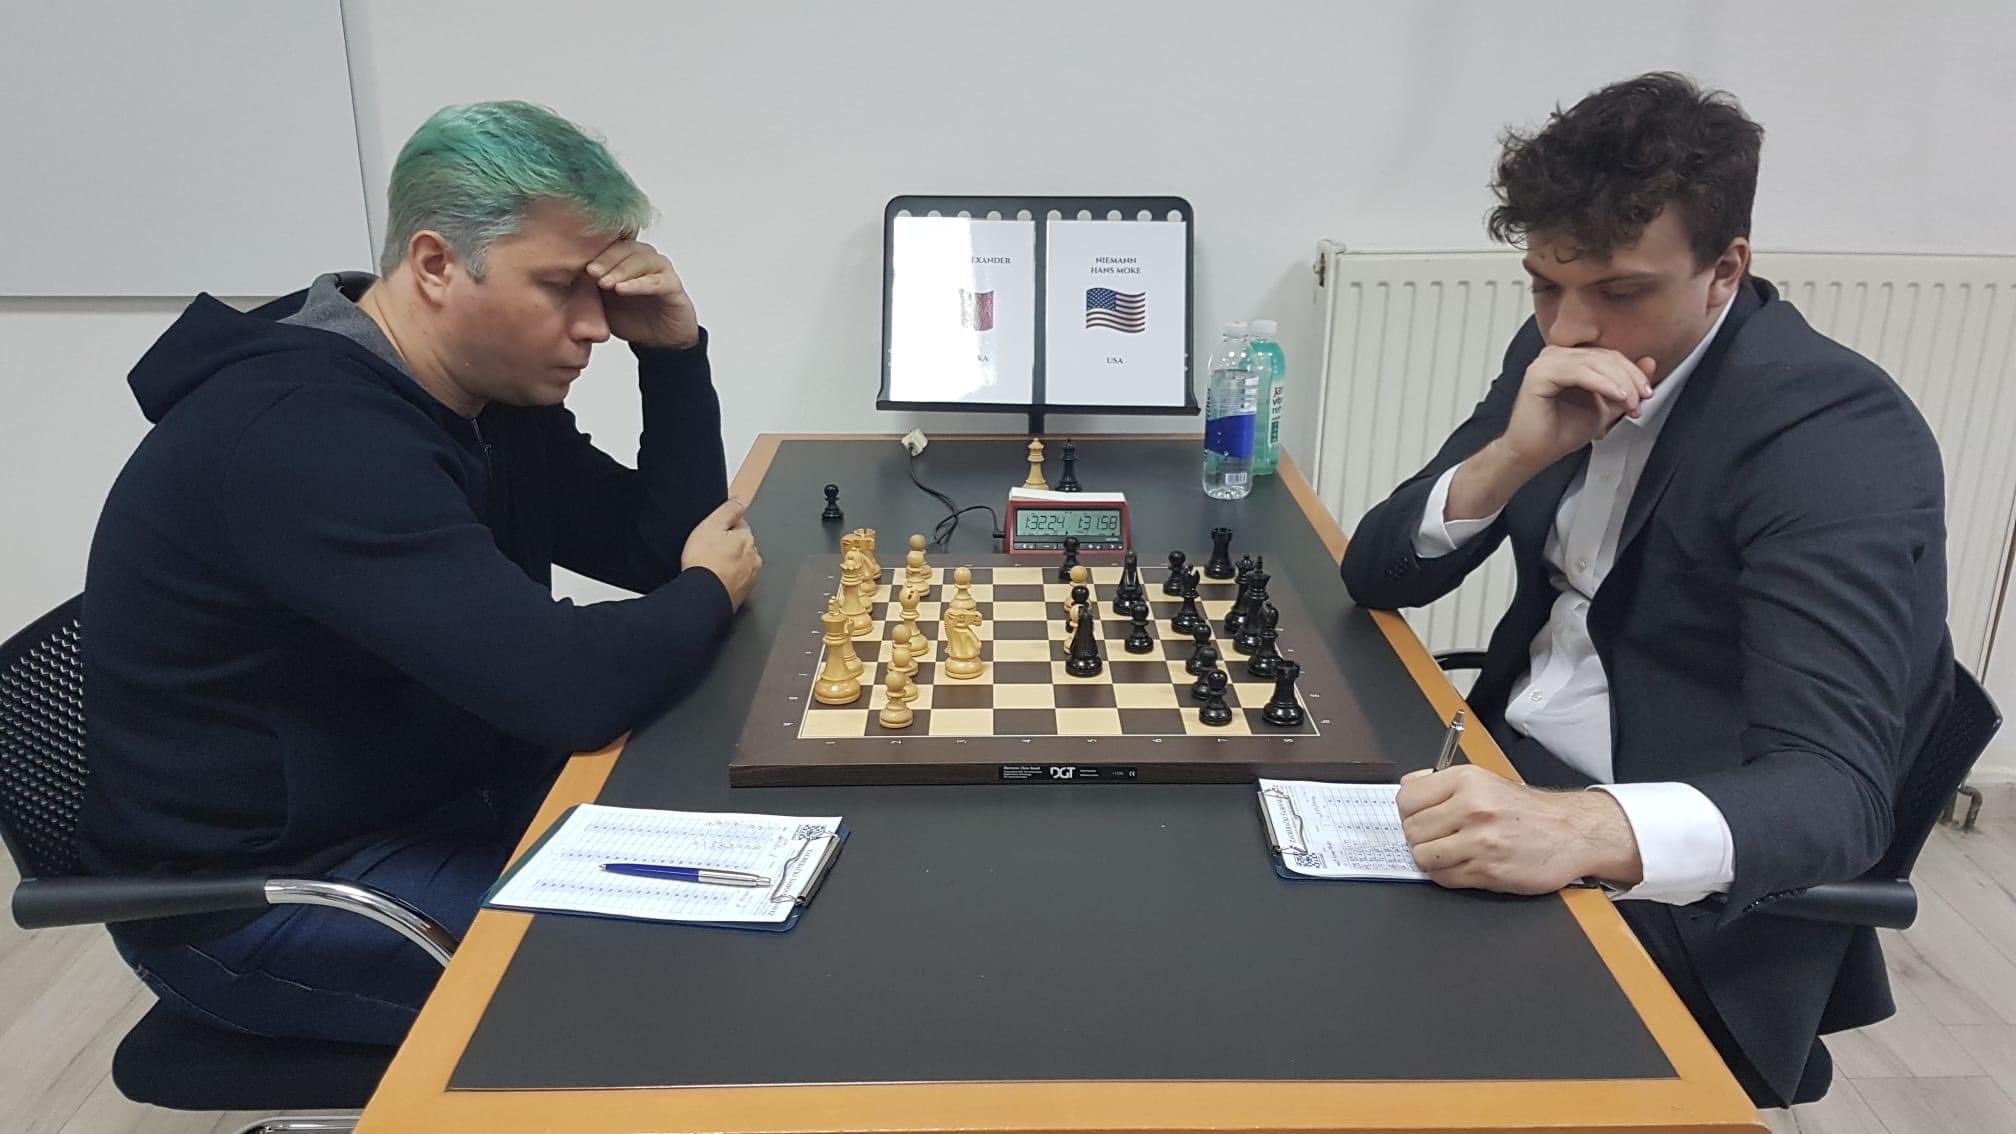 Hans Niemann scored 7½/9 points to win the Uralsk Open 2023 in Kazakhstan.  He finished a full point ahead of a five-player chasing pack…